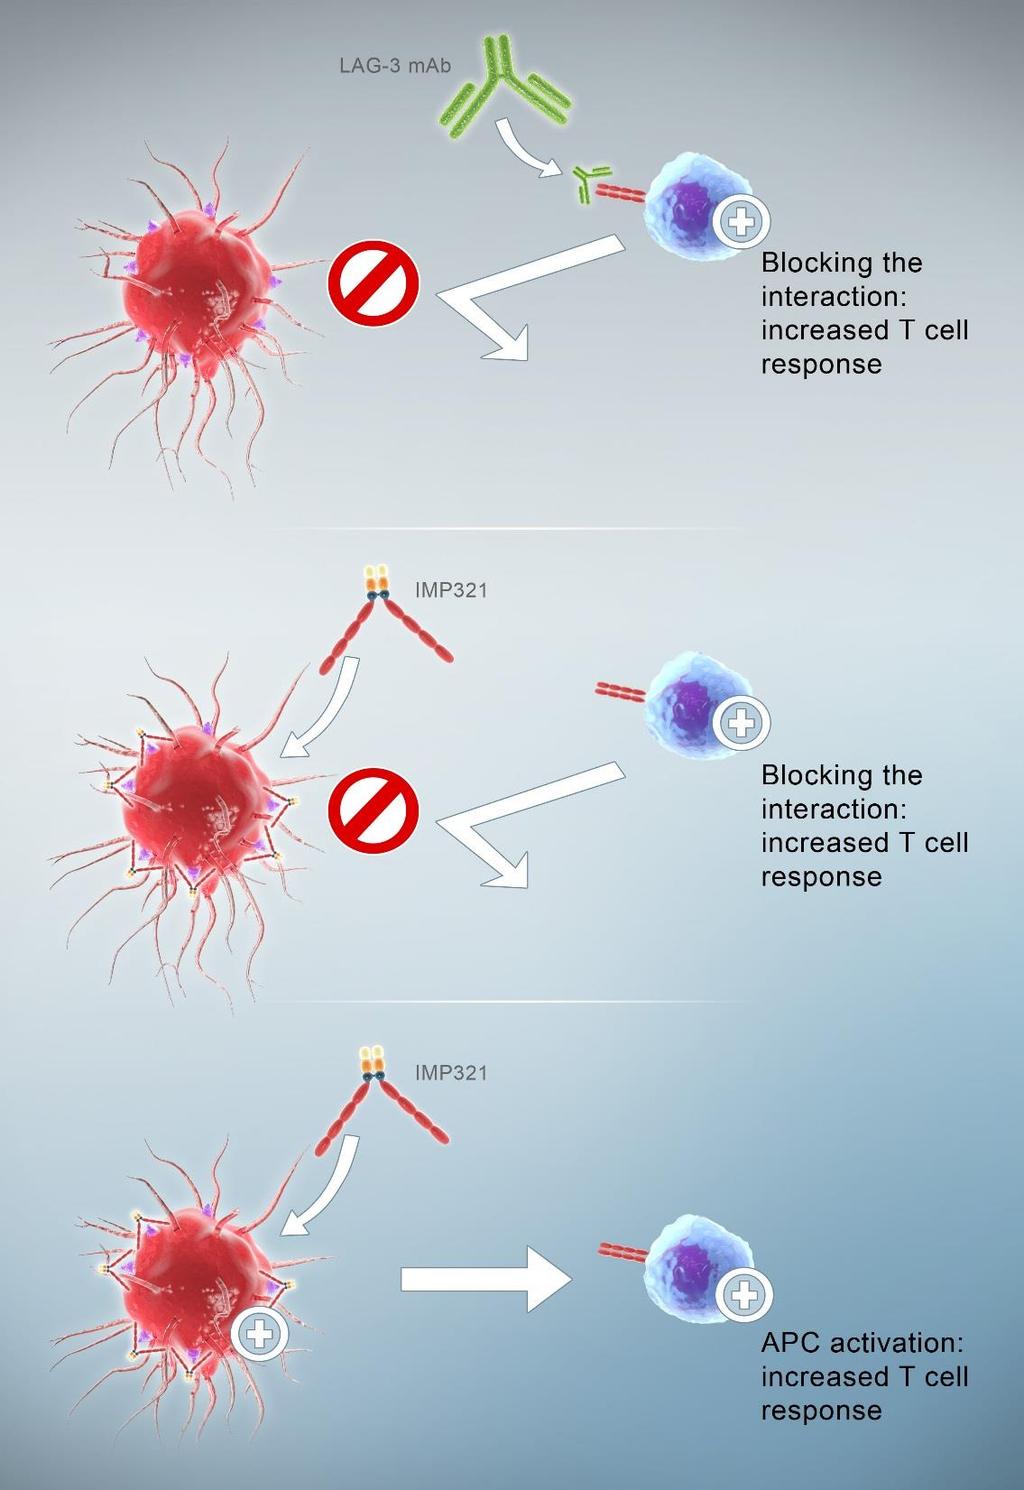 LAG-3 blocking mab: an immune checkpoint inhibitor LAG-3Ig fusion protein (IMP321): an